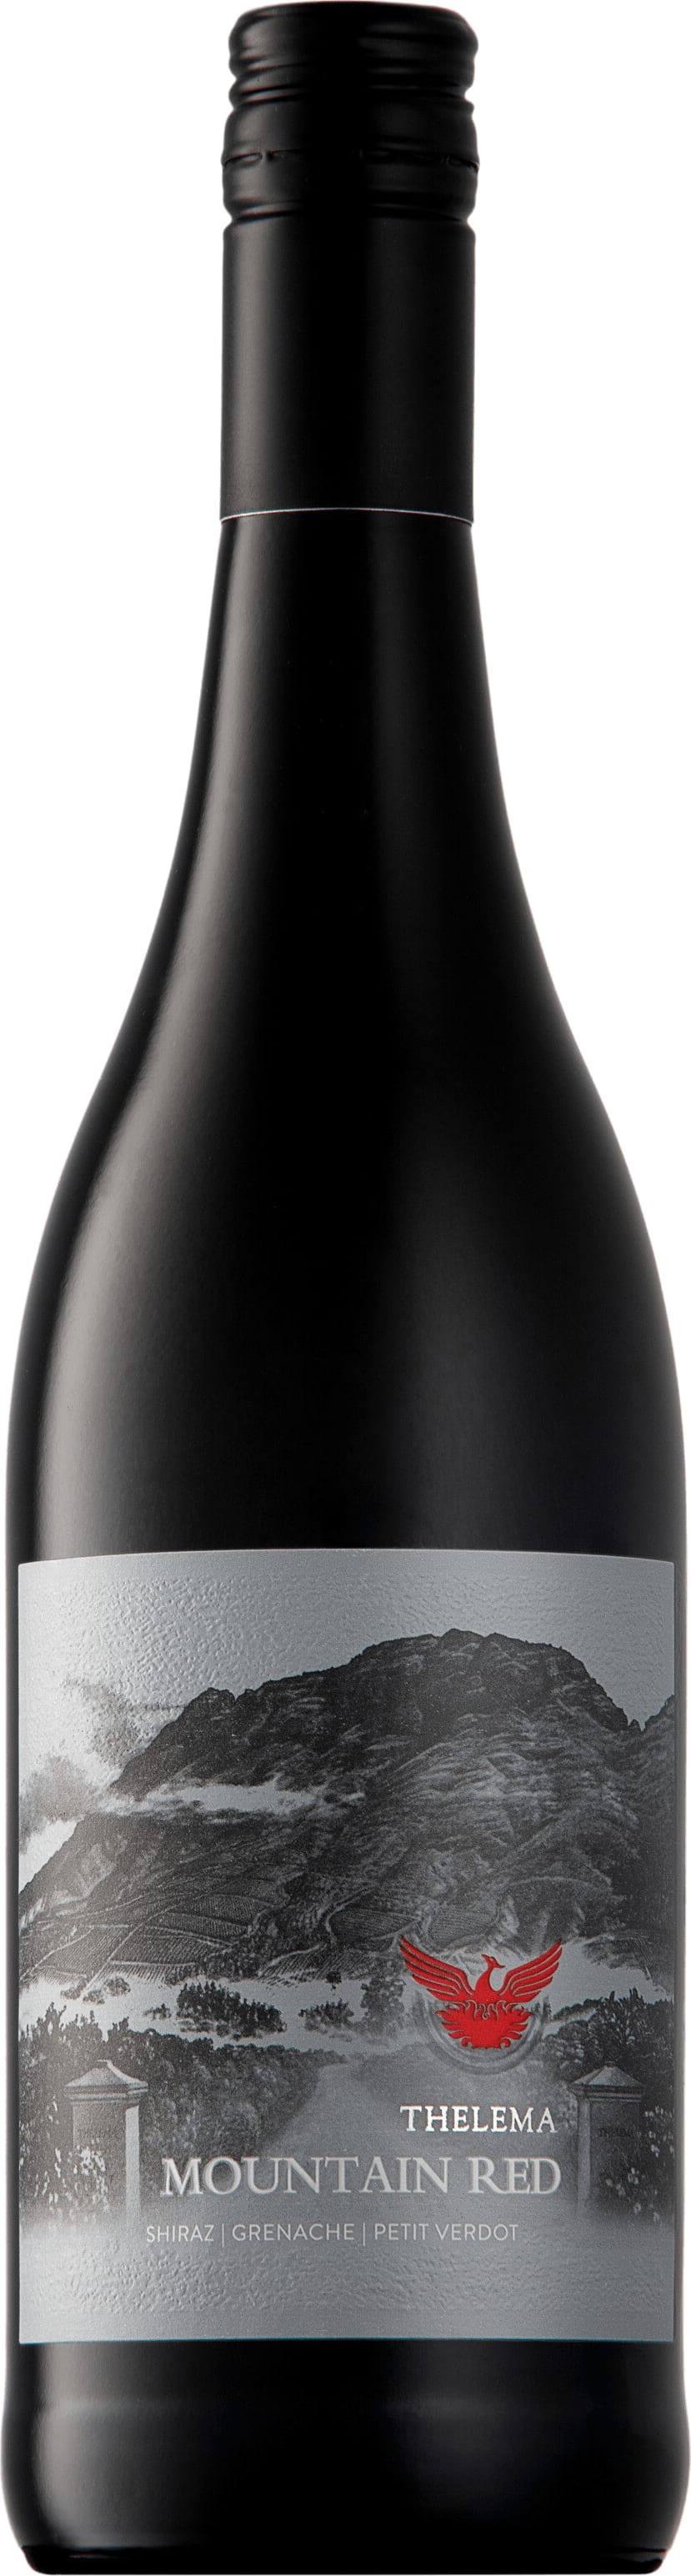 Thelema Mountain Vineyards Mountain Red 2020 75cl - Buy Thelema Mountain Vineyards Wines from GREAT WINES DIRECT wine shop